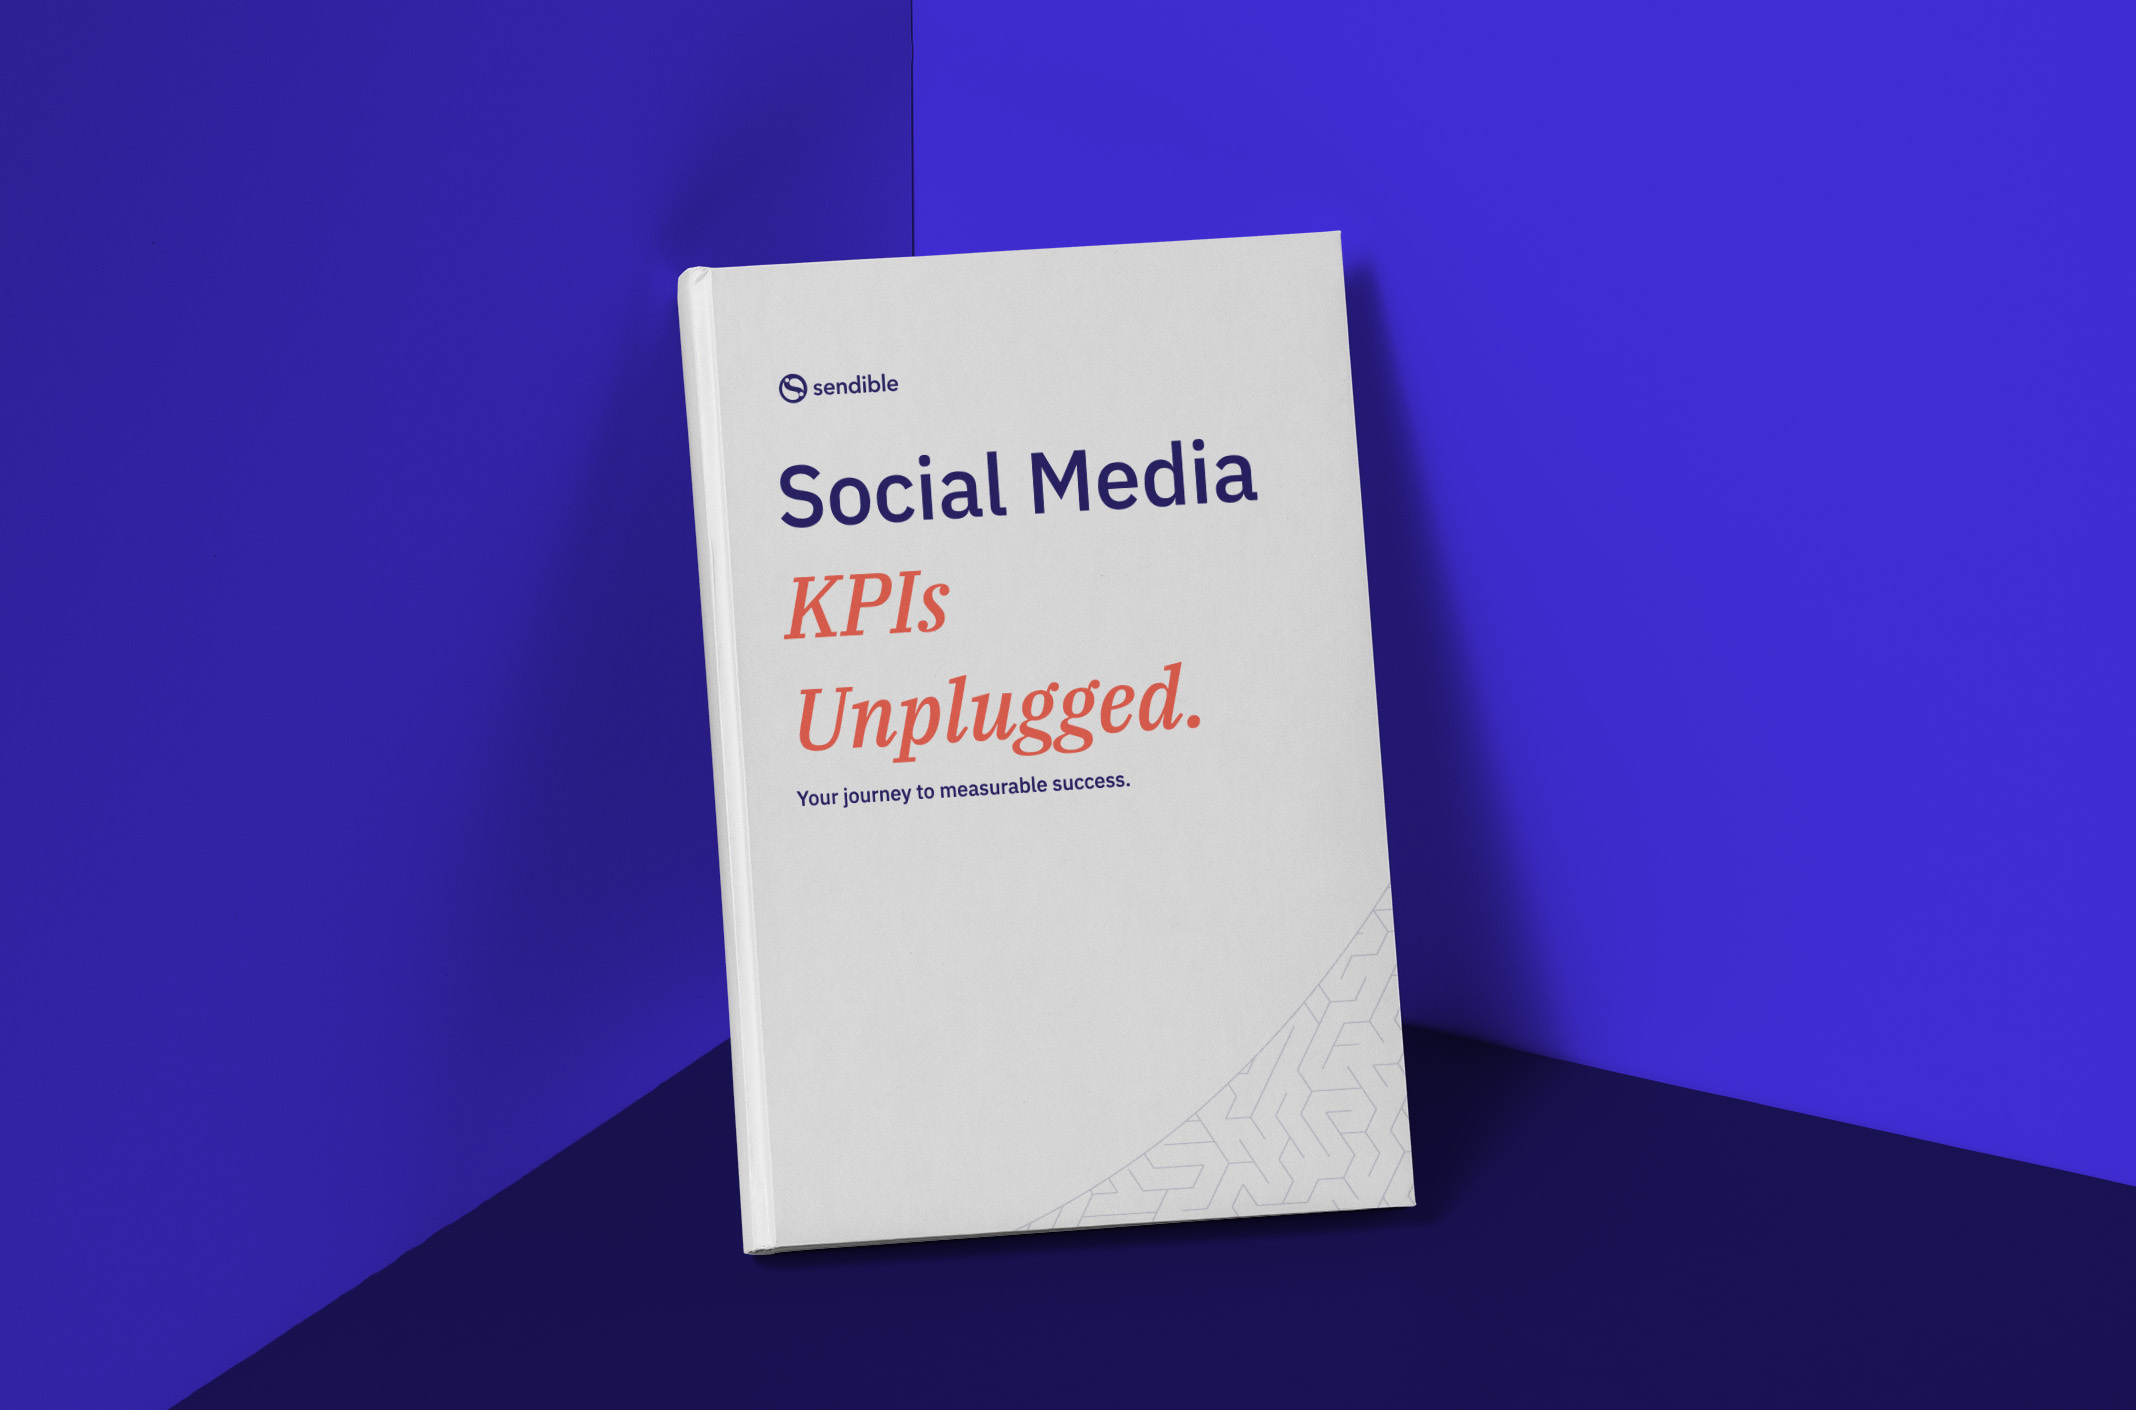 From clicks to conversions: Social media KPIs unplugged. Your Journey to measurable success.